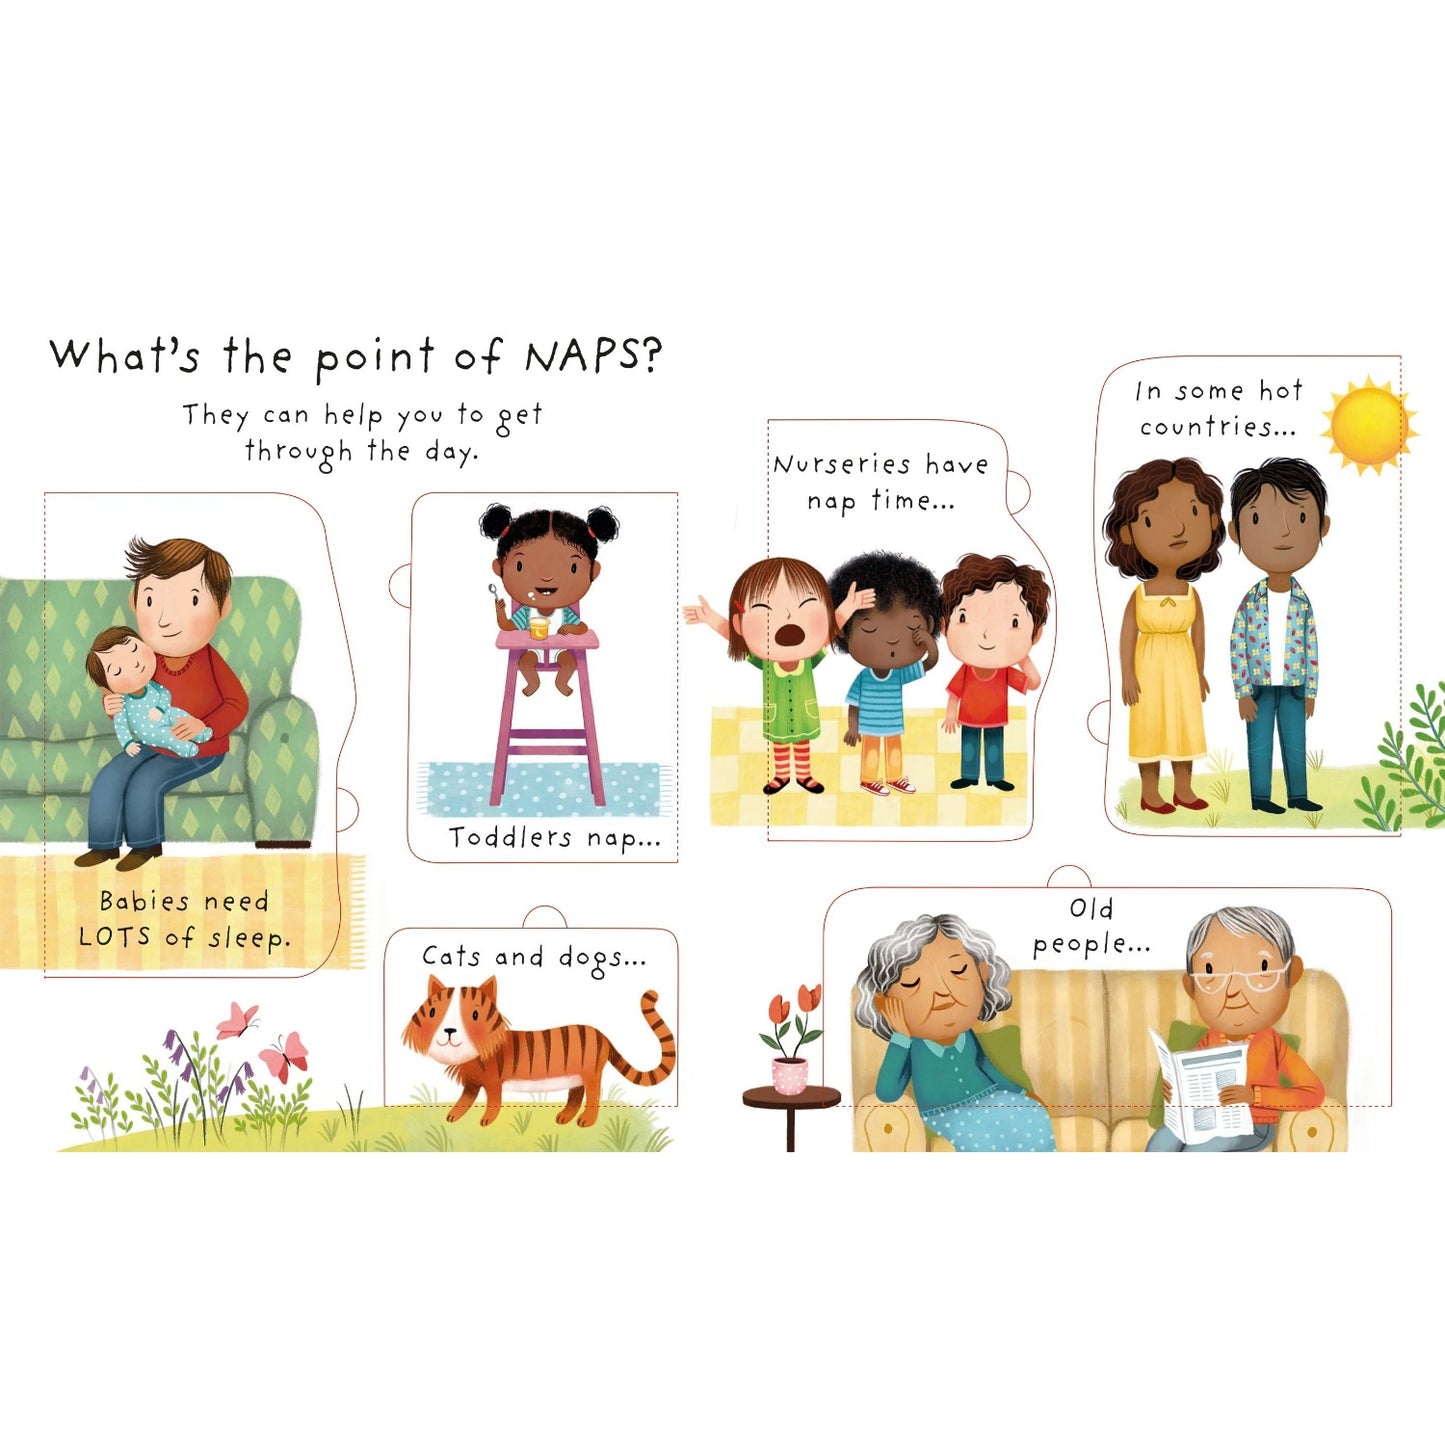 Why do I have to go to bed? - Very First Questions & Answers Lift-the-Flap Board Book